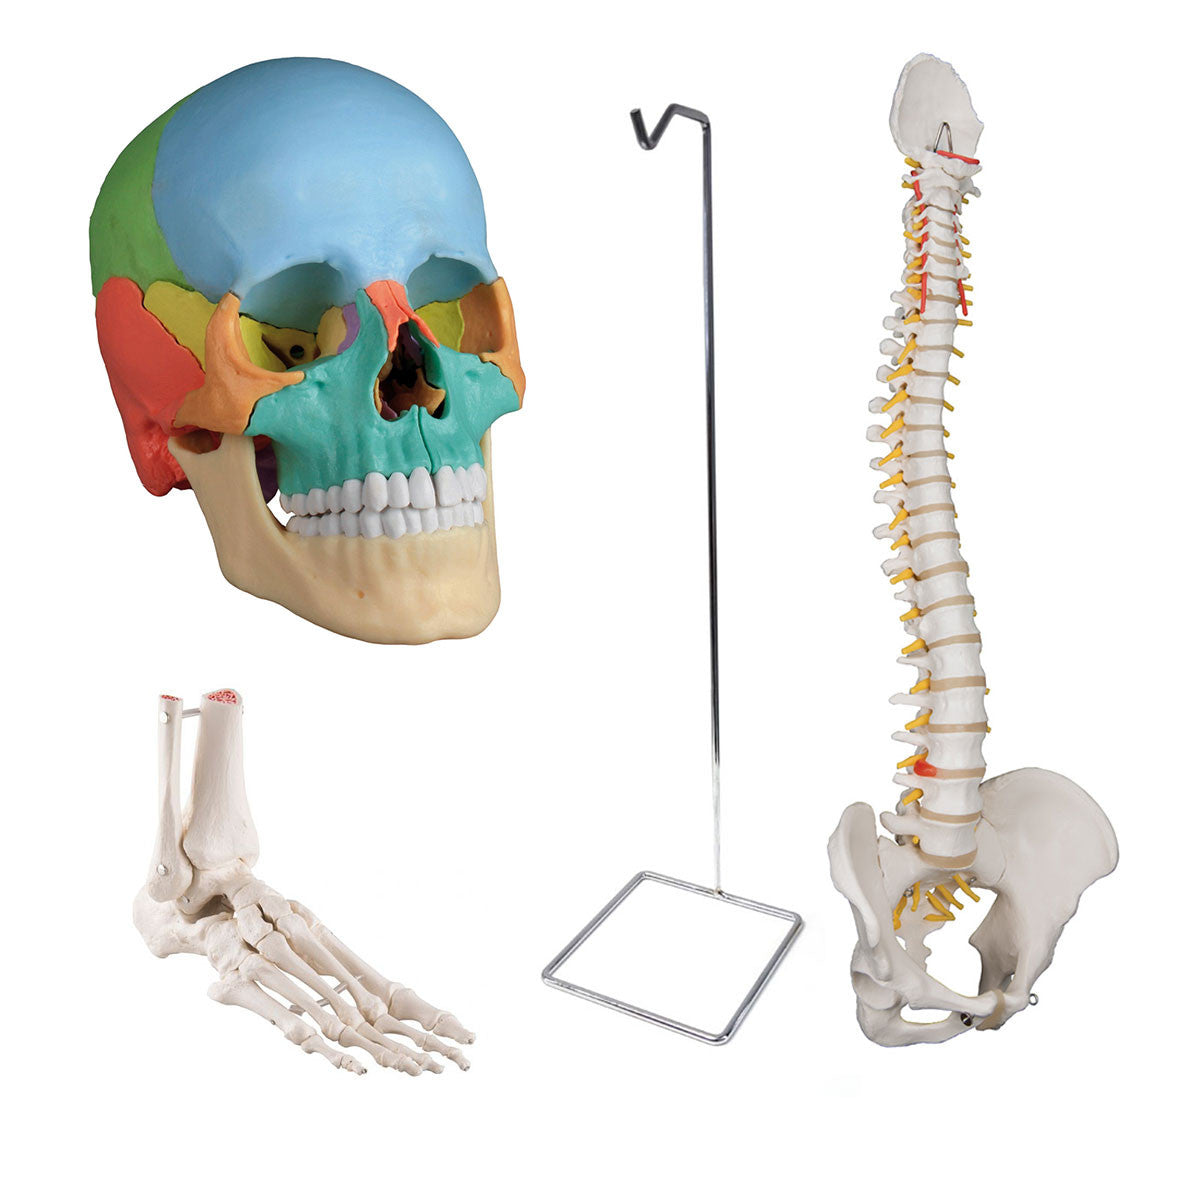 Osteopathic Bundle with Didactic Skull and Standard Flexible Spine